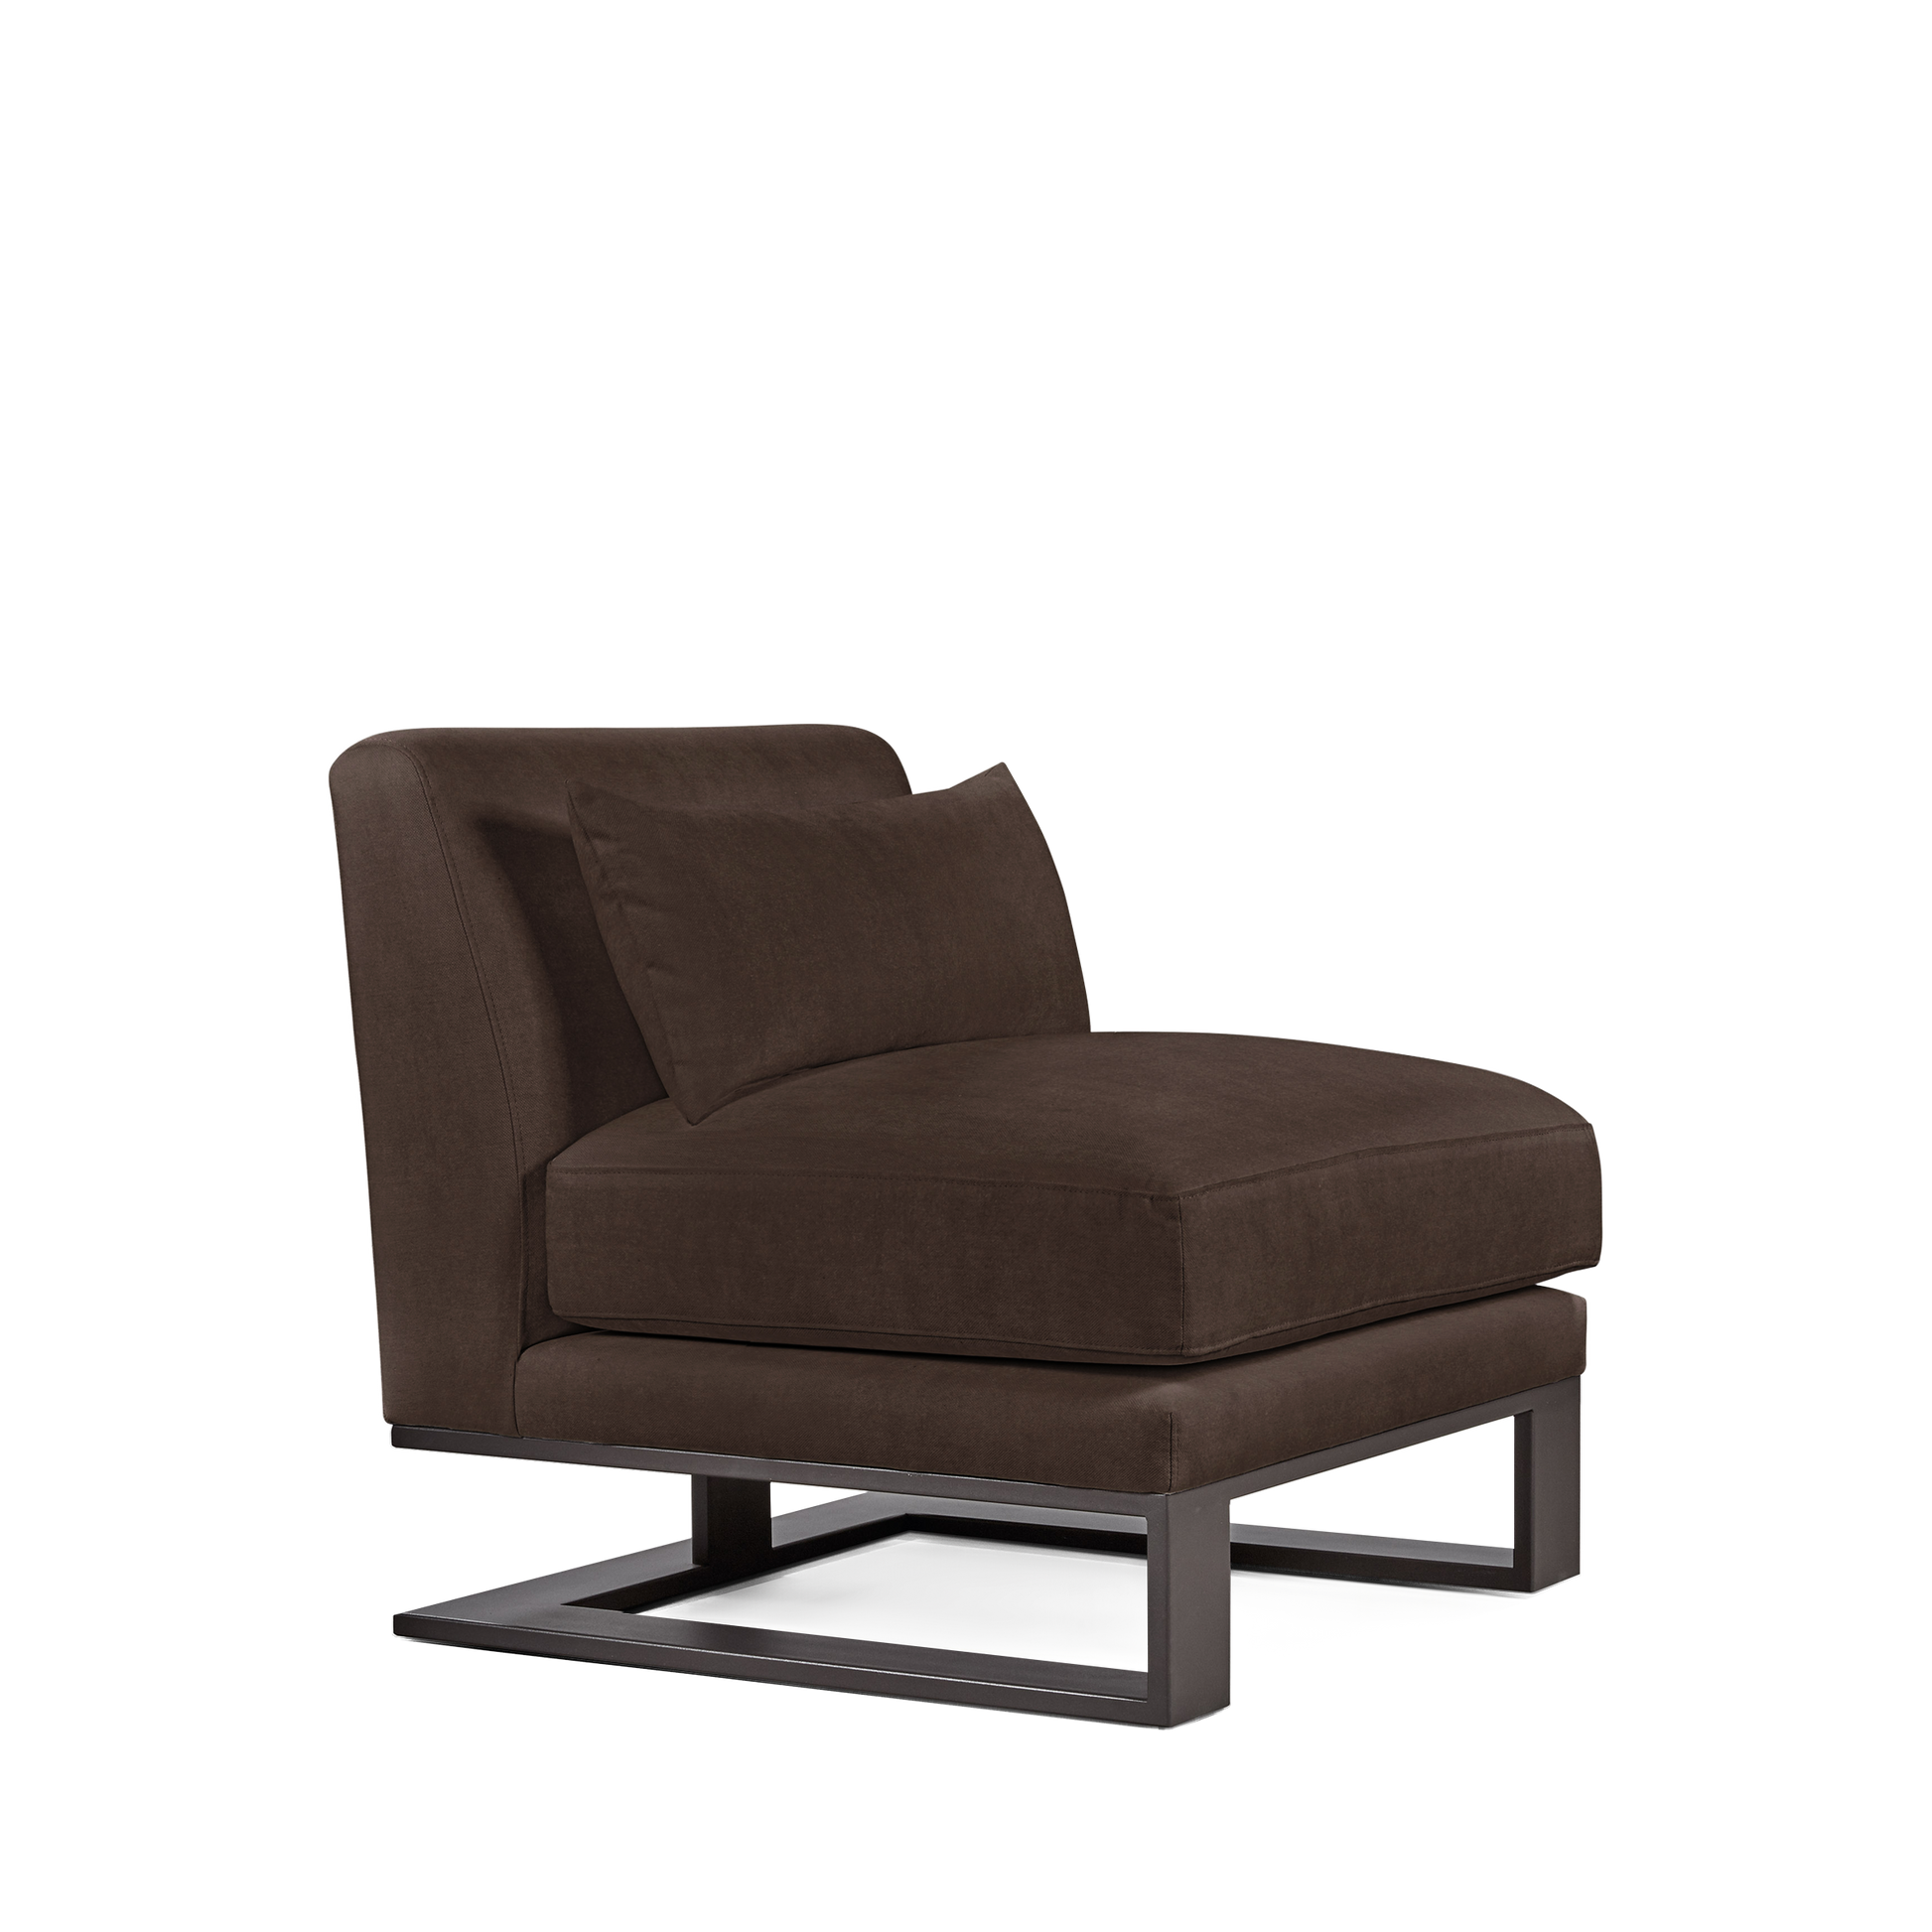 Alpes armchair with suede brown textile and moka colored wood legs 